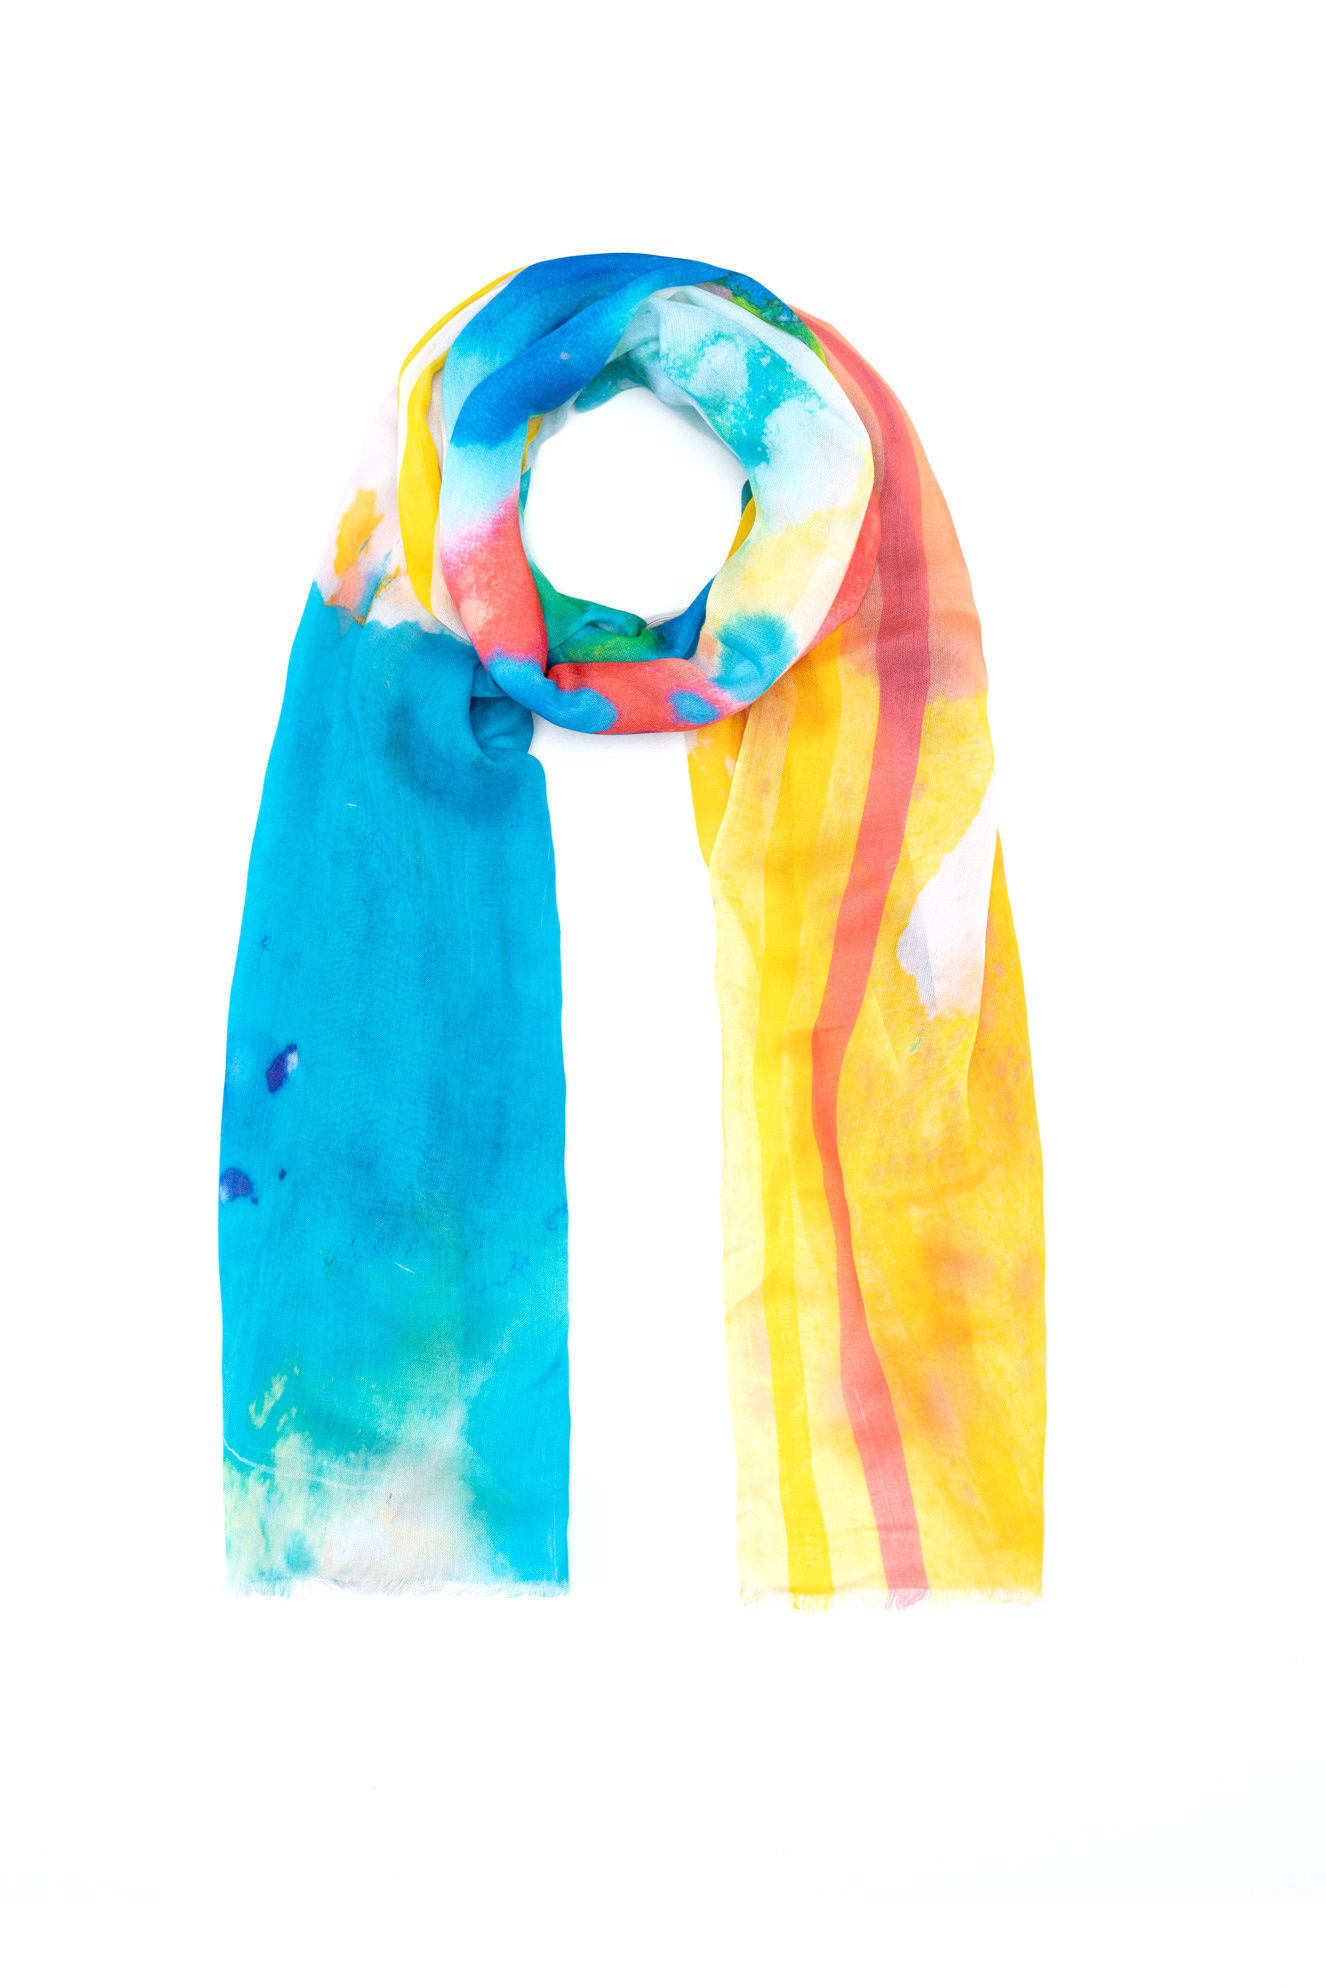 91118_woven_print_scarf_spring_abstract_tied.jpg